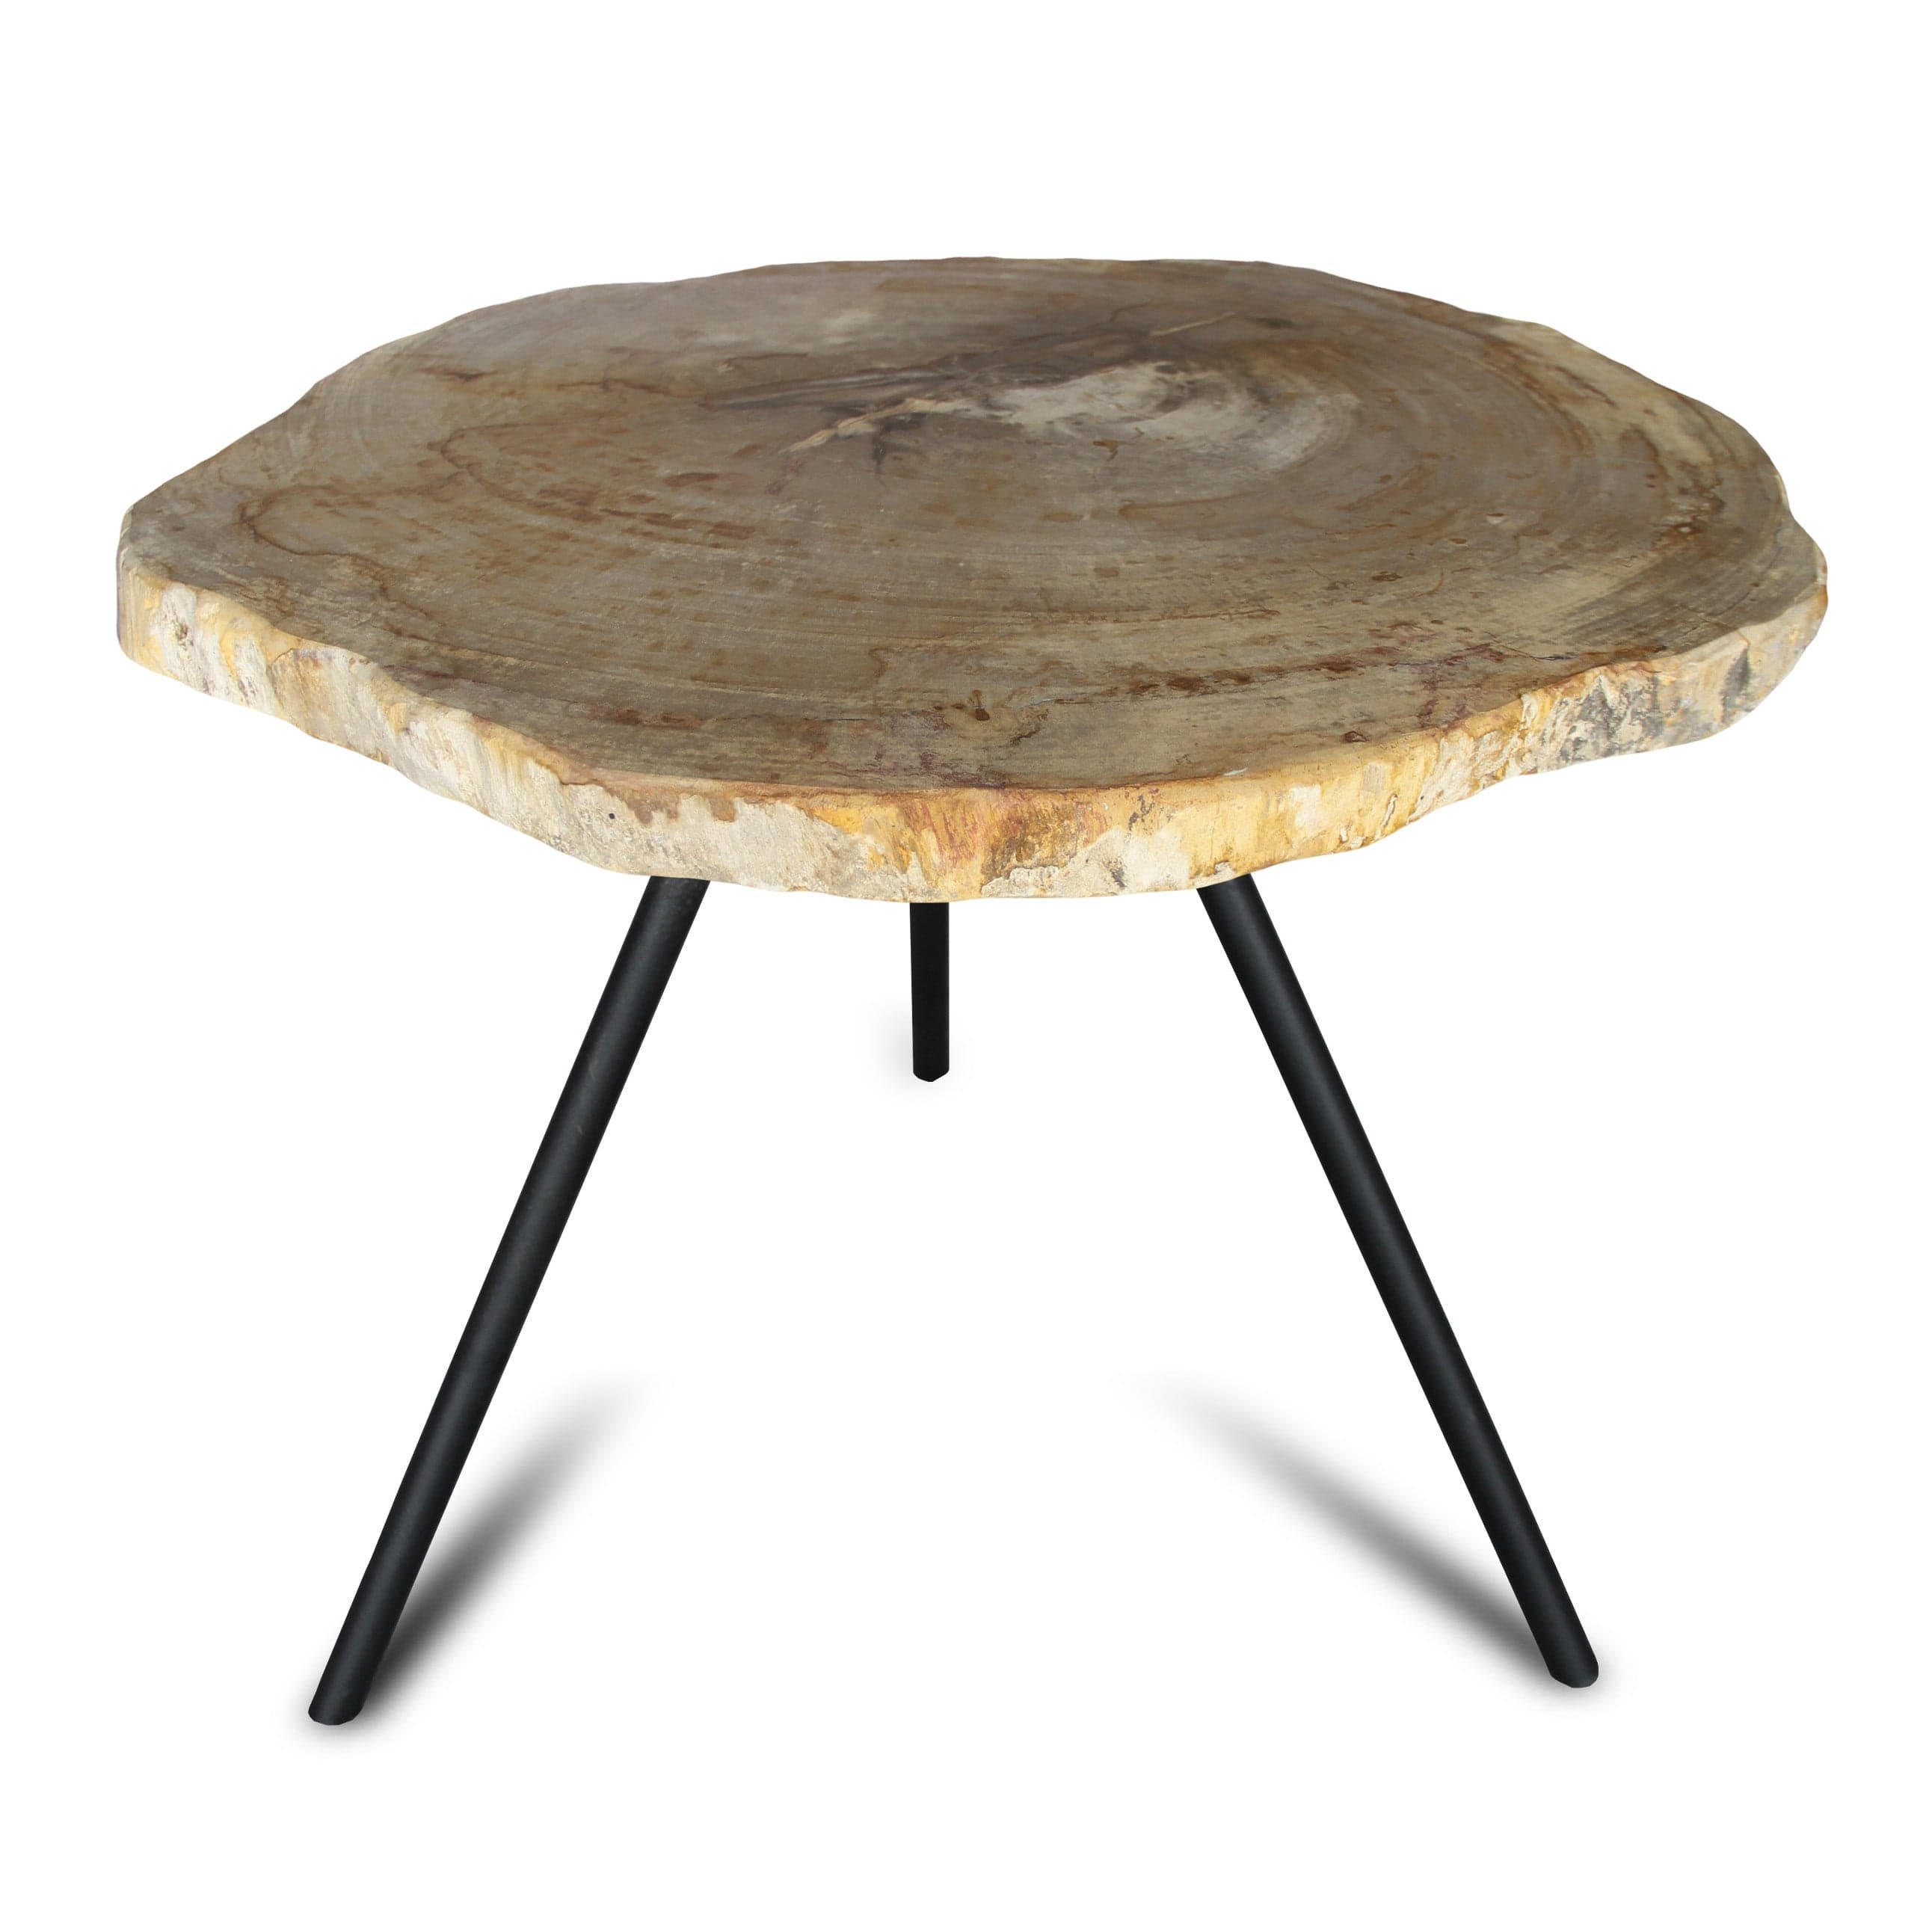 Kalifano Petrified Wood Petrified Wood Round Slice Side Table from Indonesia - 27" / 73 lbs PWT2800.002